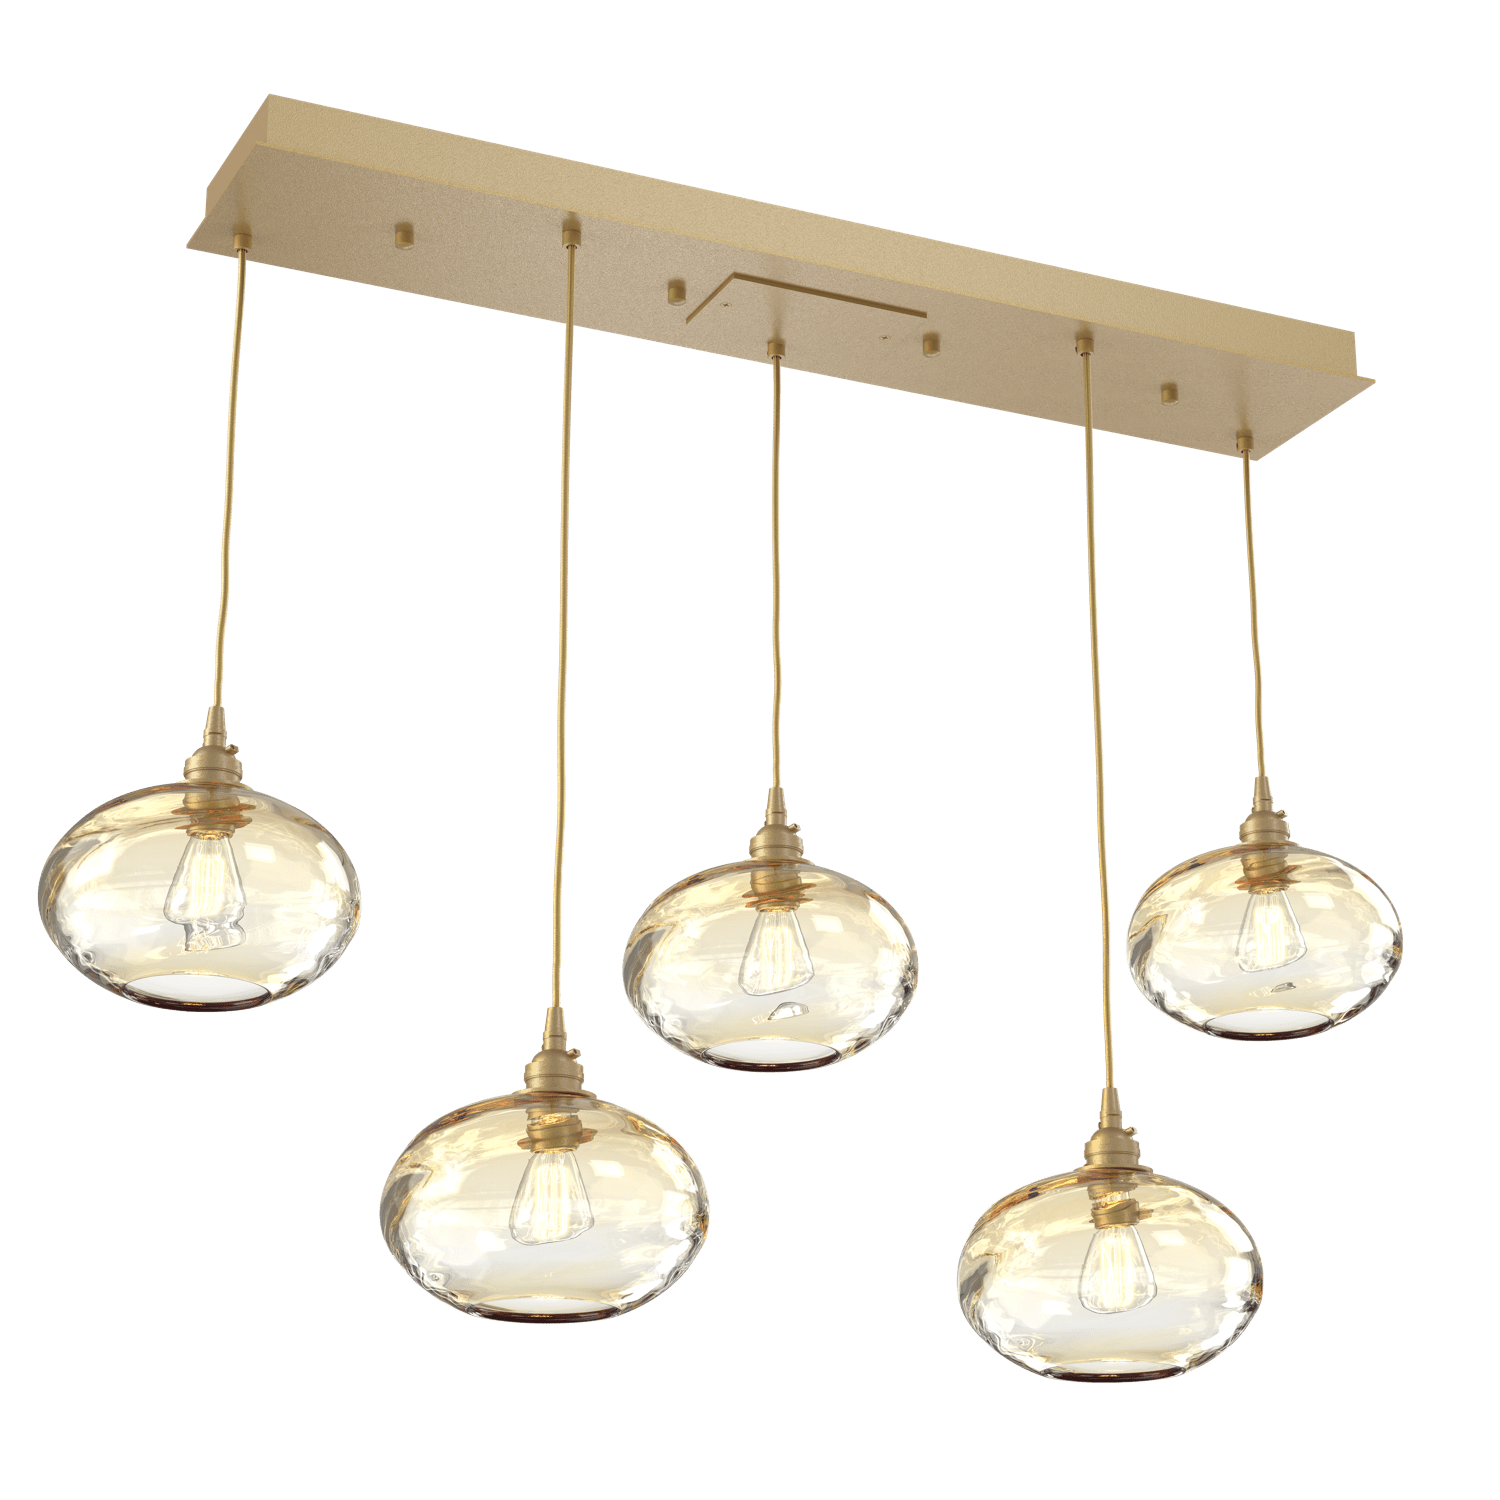 PLB0036-05-GB-OA-Hammerton-Studio-Optic-Blown-Glass-Coppa-5-light-linear-pendant-chandelier-with-gilded-brass-finish-and-optic-amber-blown-glass-shades-and-incandescent-lamping